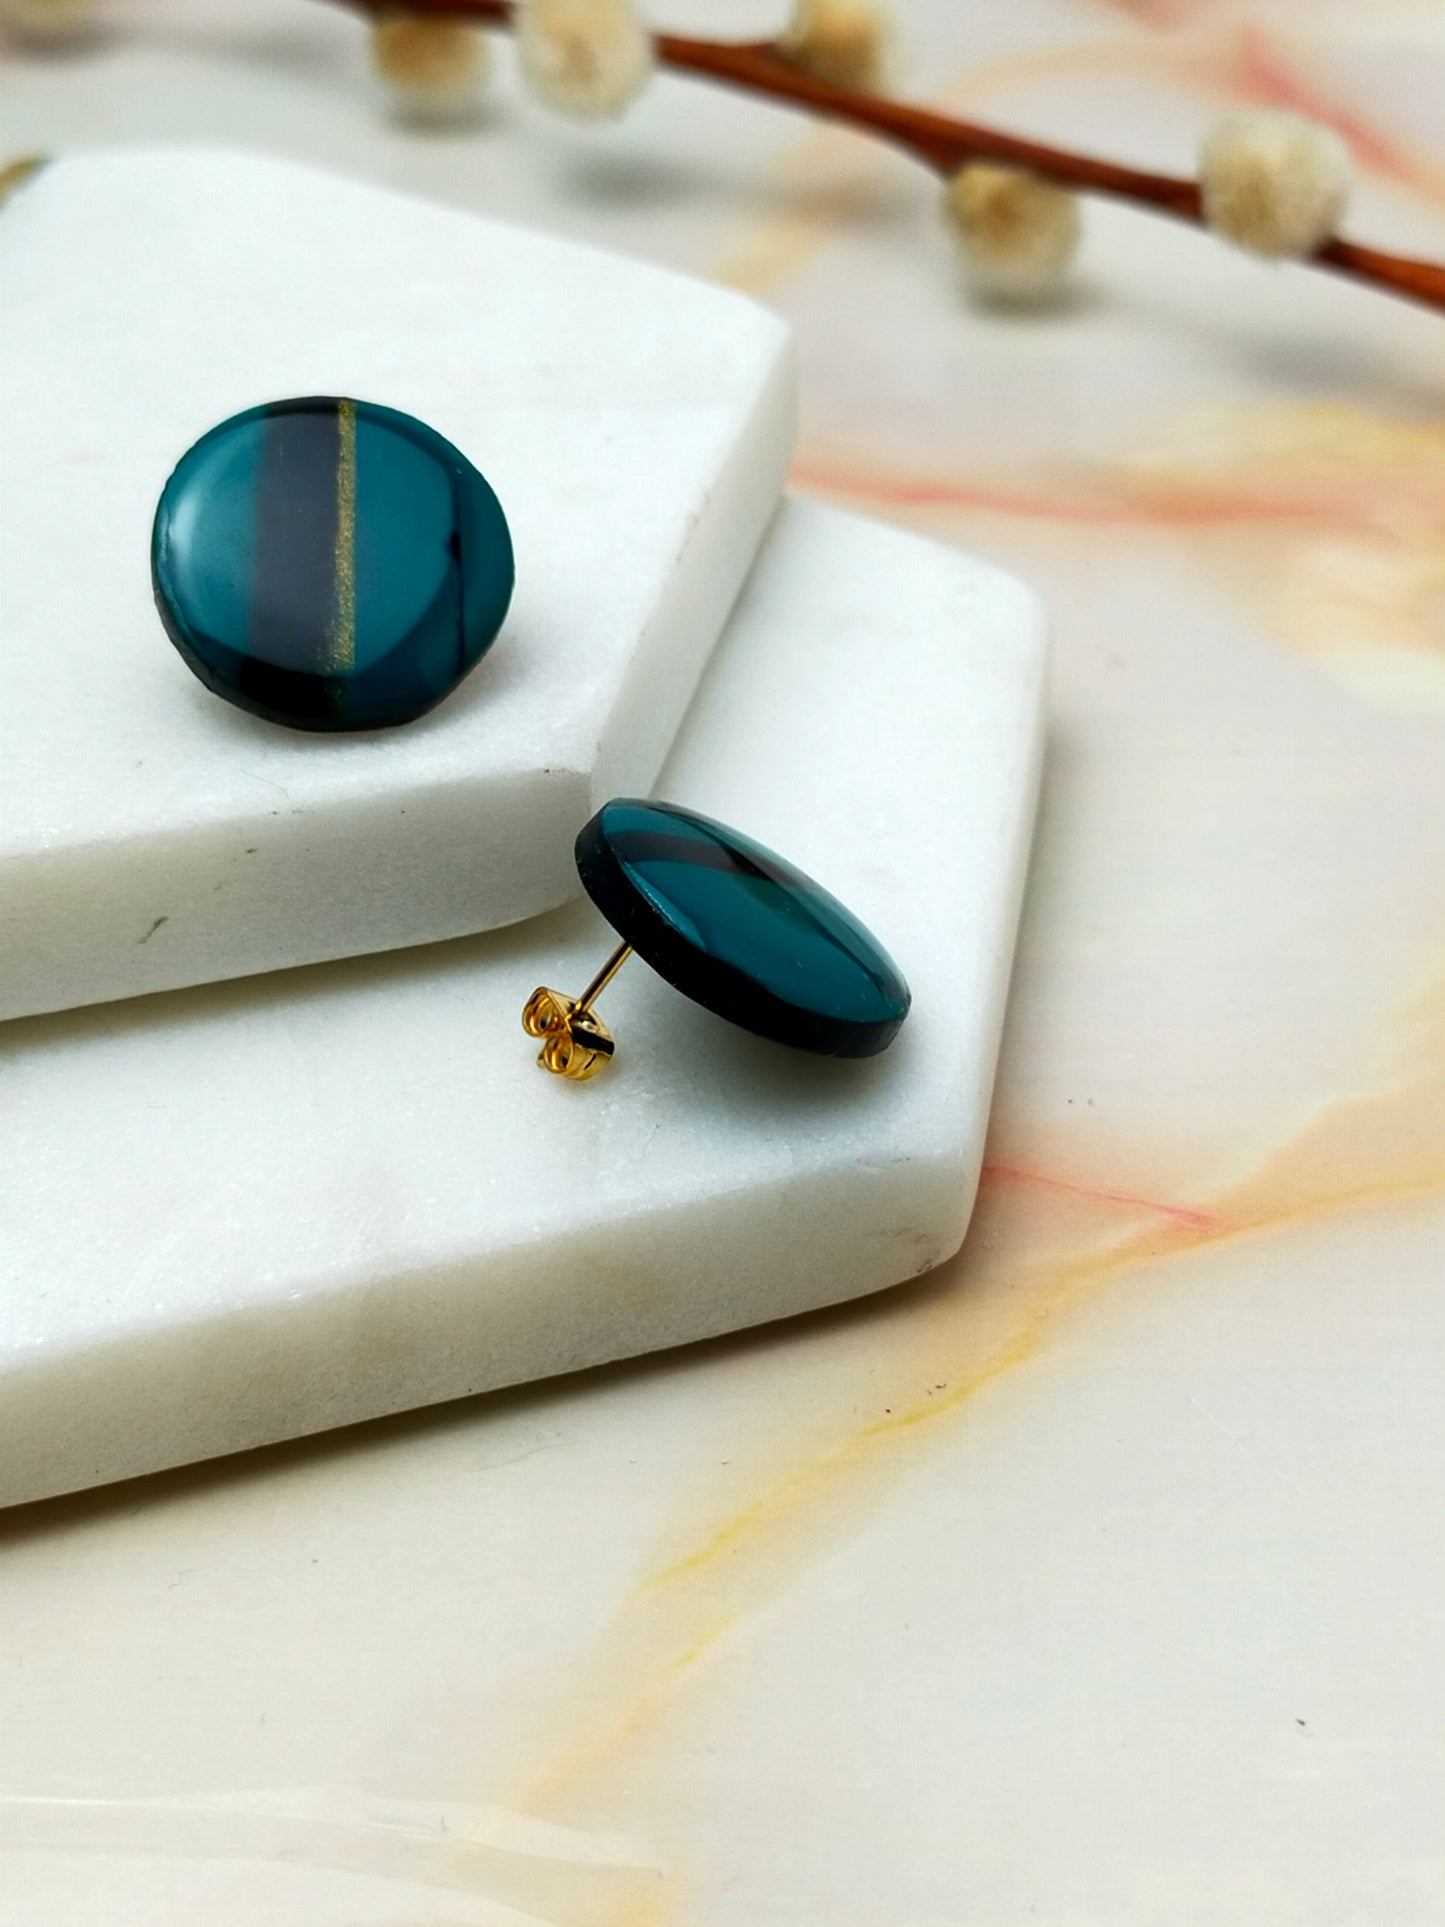 "Poppy" Green Black and Gold Circle Polymer Clay Studs Earrings